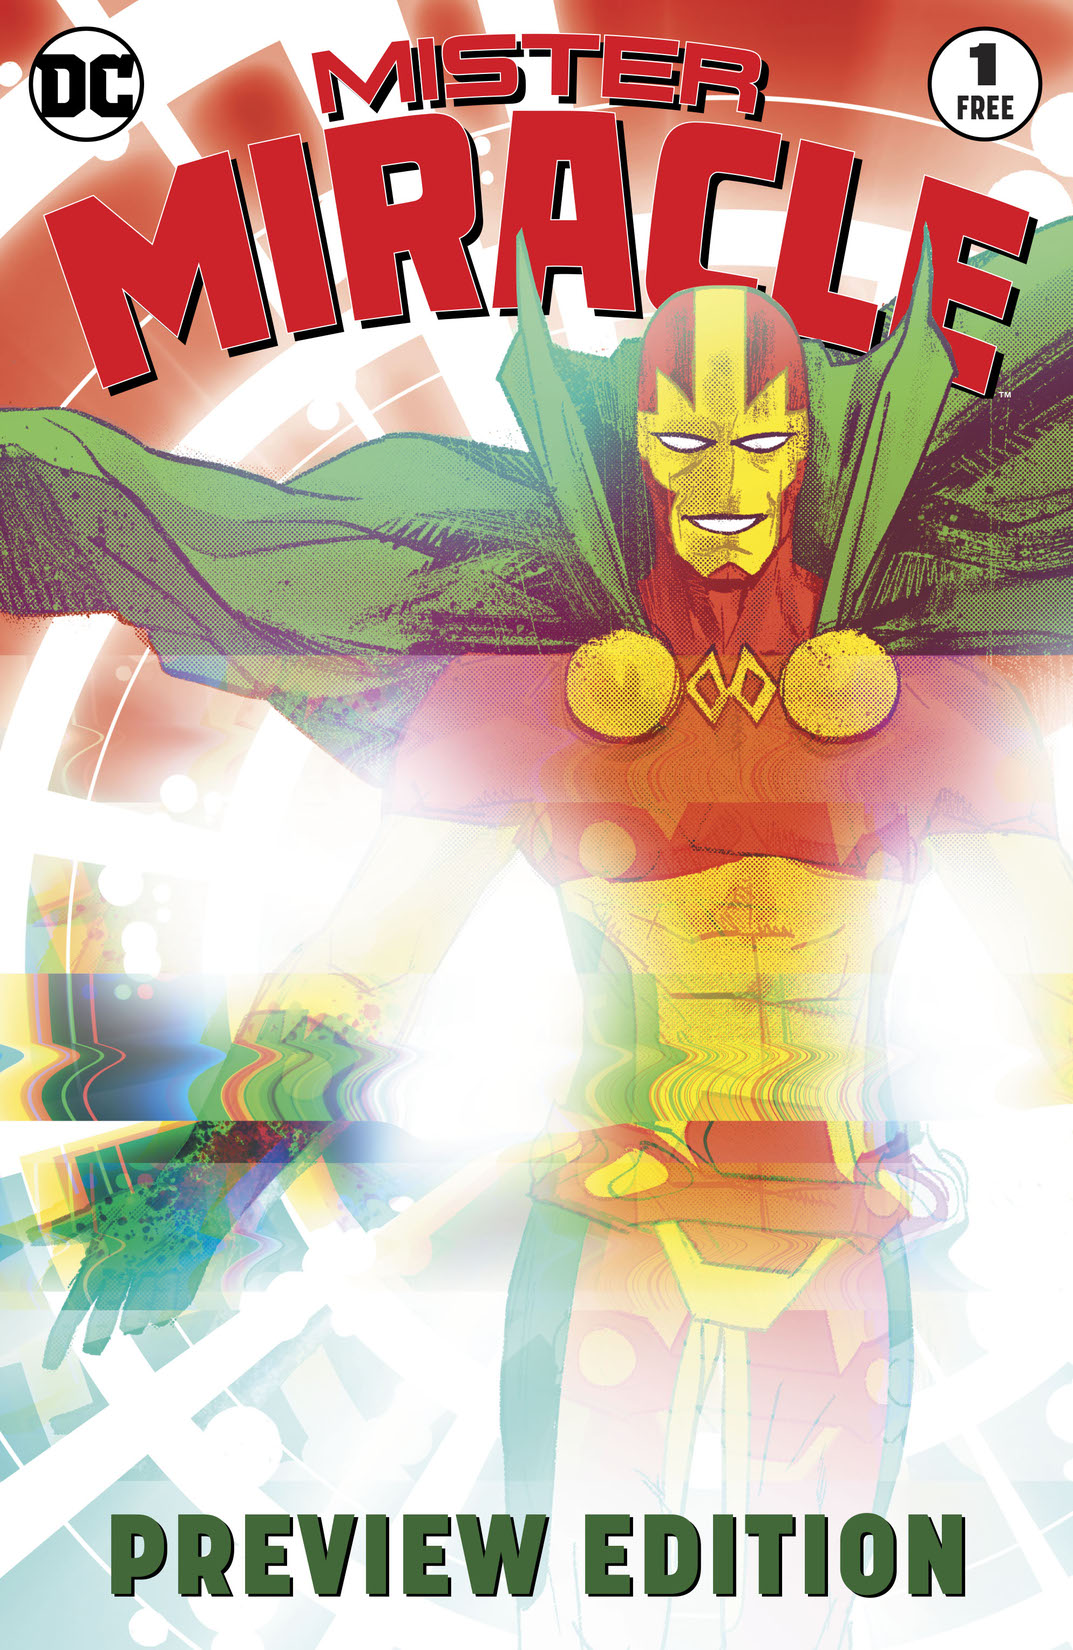 Mister Miracle #1 Extended Preview (2017-) #1 preview images